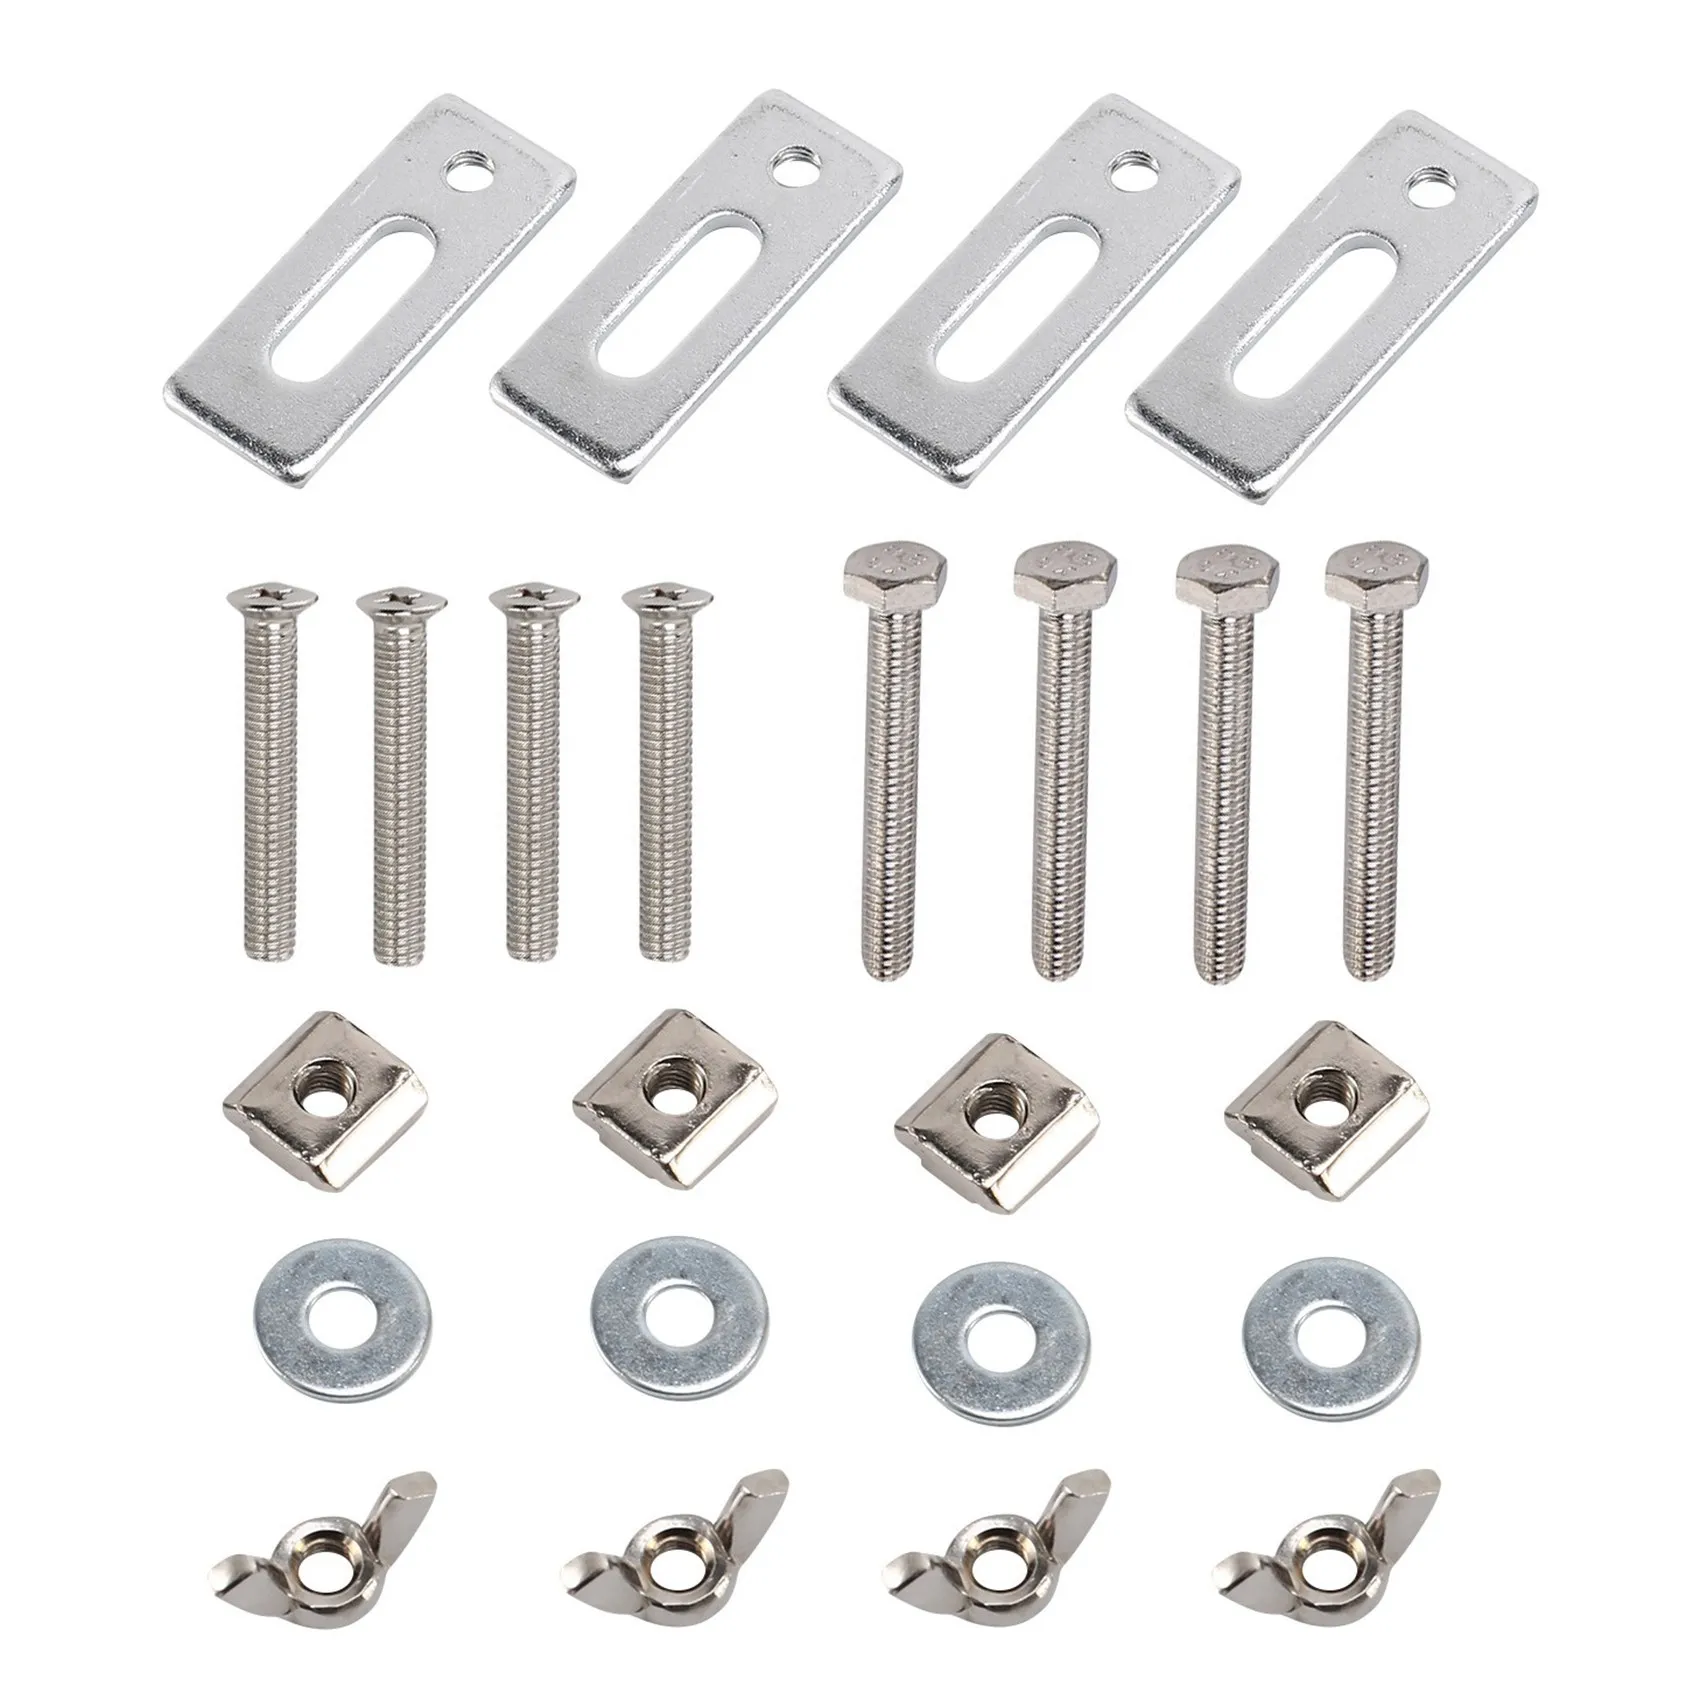 4 Pack T-Track Clamp,Mini T Track Hold Down Clamps Kit Compatible with 3018-PRO,3018-PROVer,1810-PRO CNC Router Machine